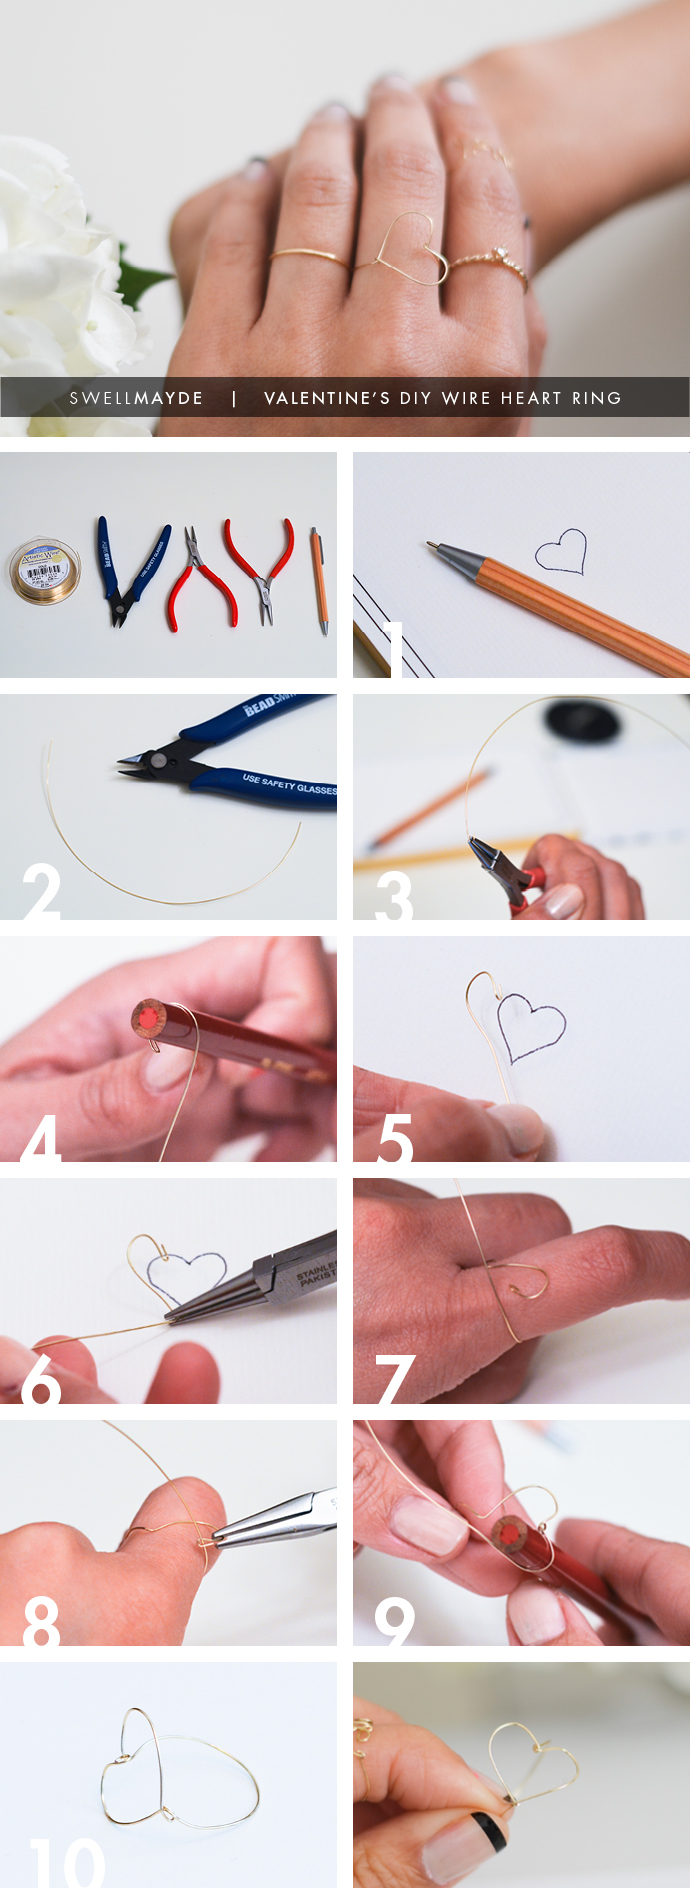 diy project for valentine's day